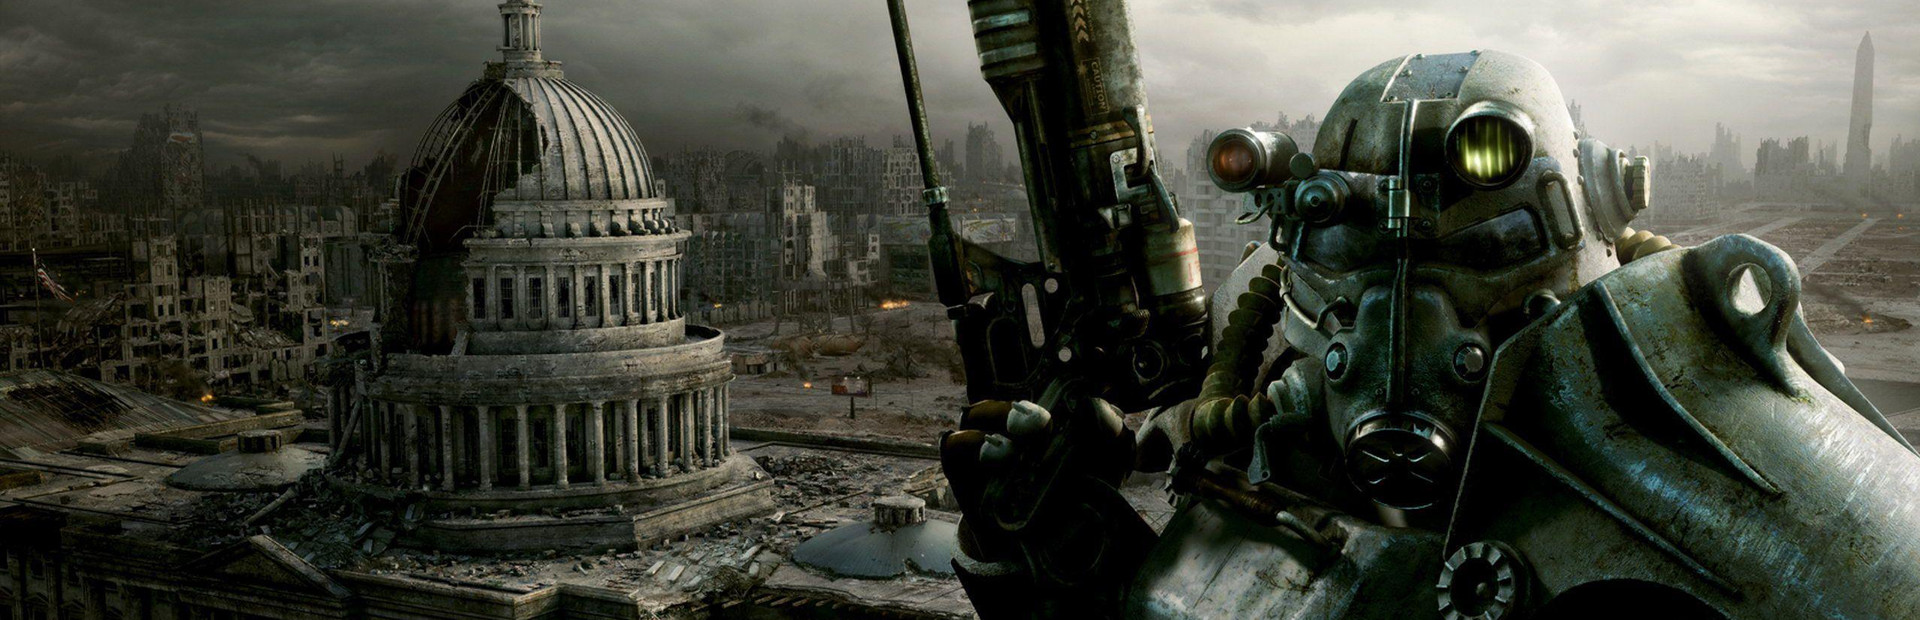 Fallout 3: Game of the Year Edition no Steam